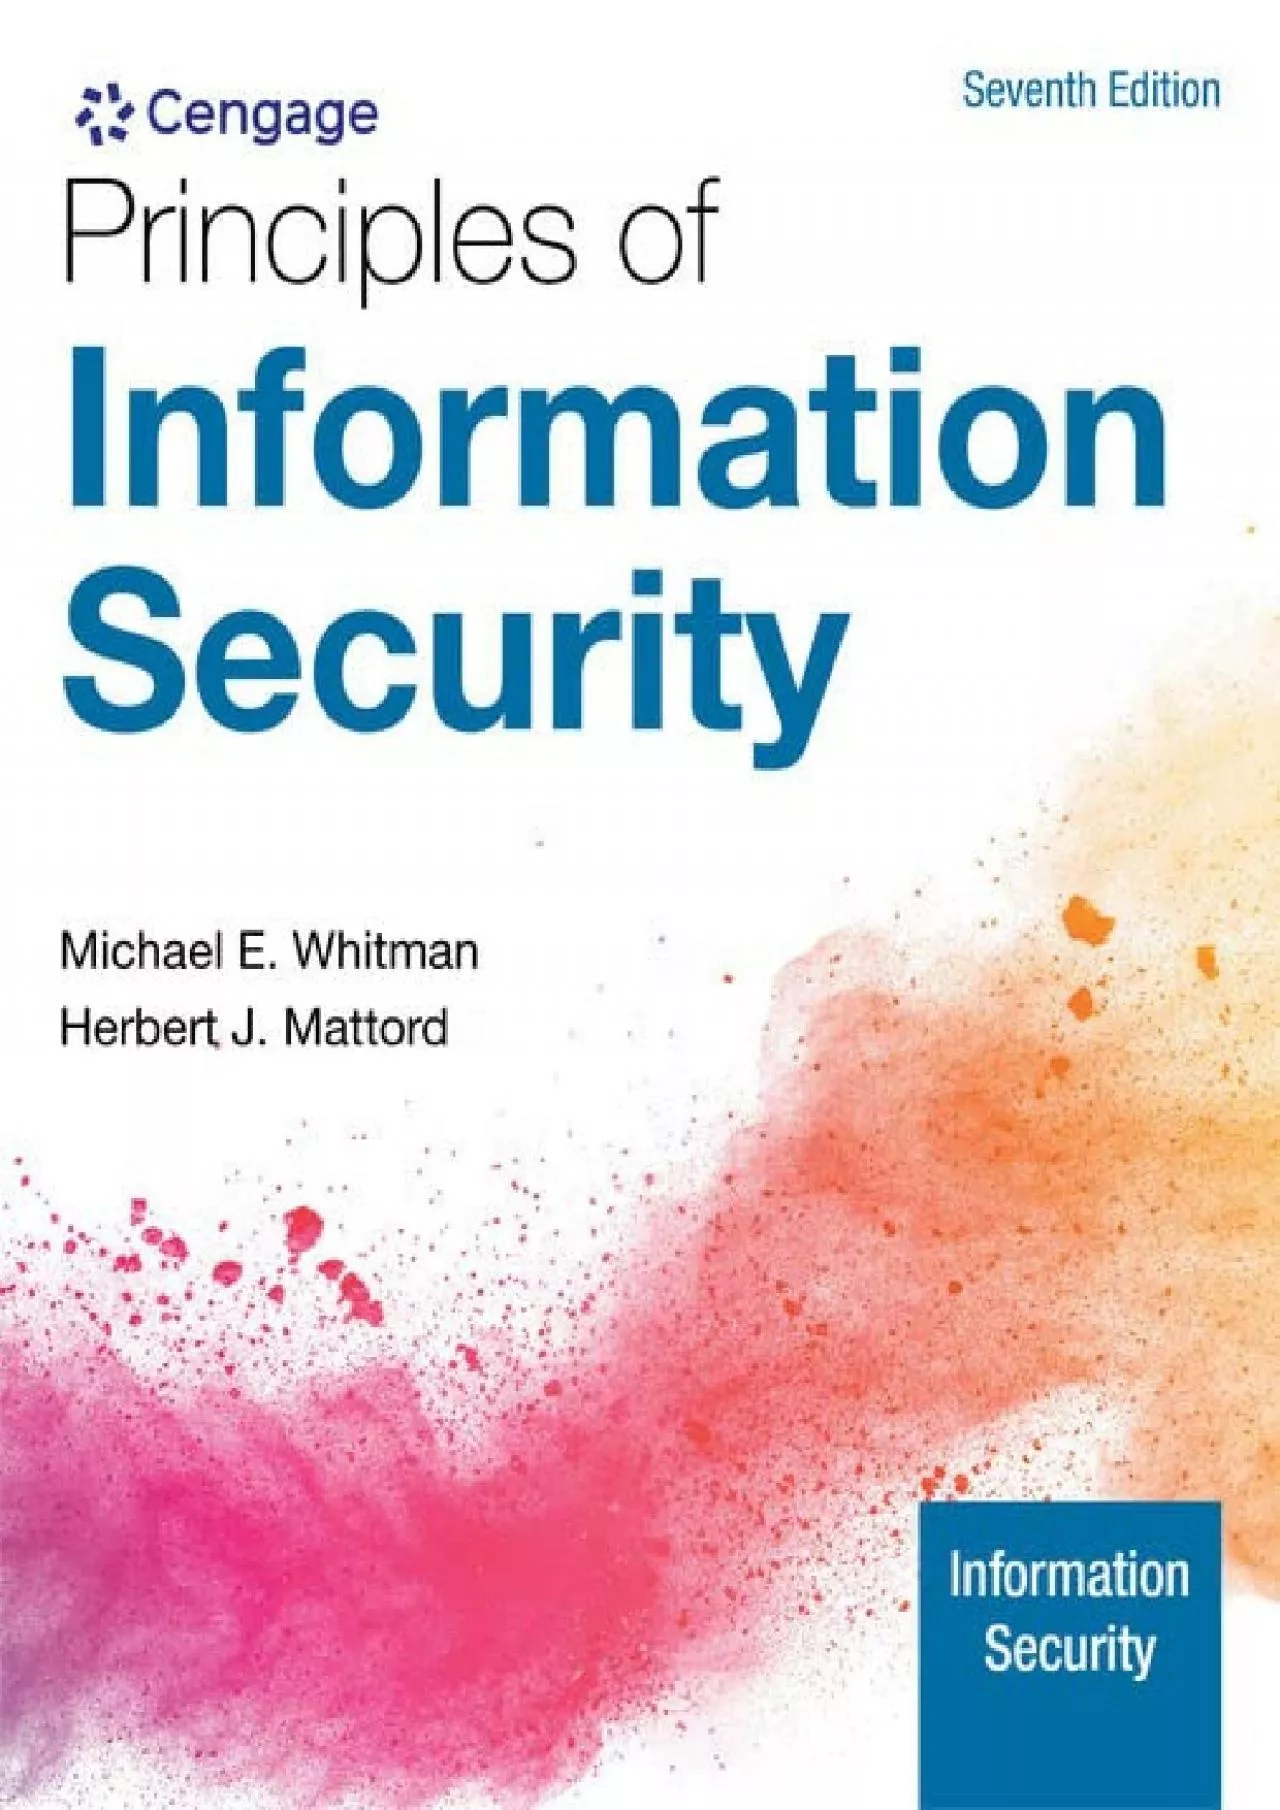 (BOOK)-Principles of Information Security (MindTap Course List)